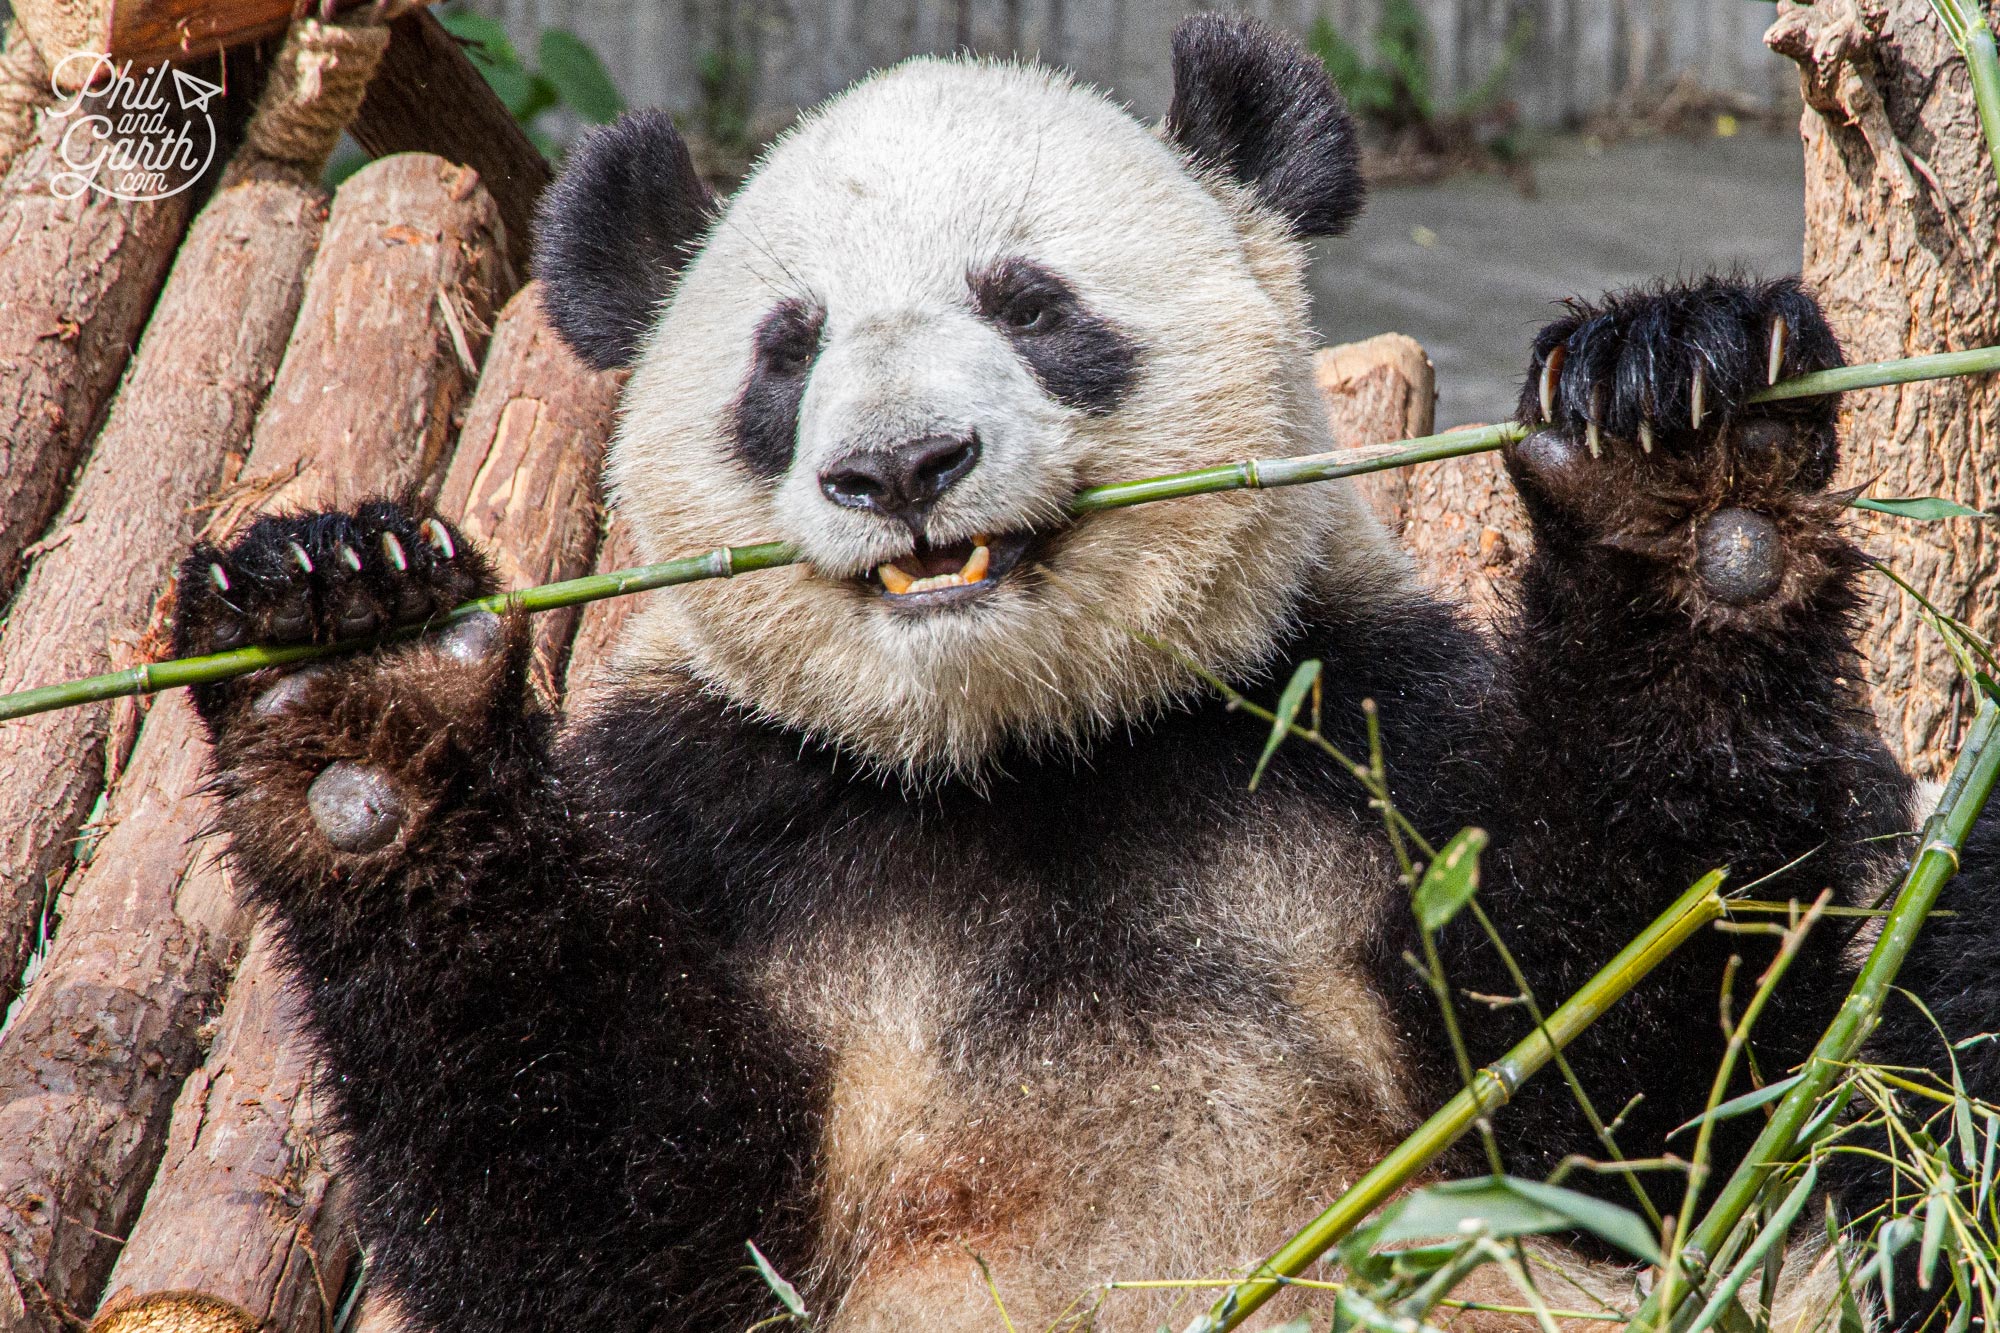 You can see the panda's thumbs in this photo which makes it easy to grip the bamboo